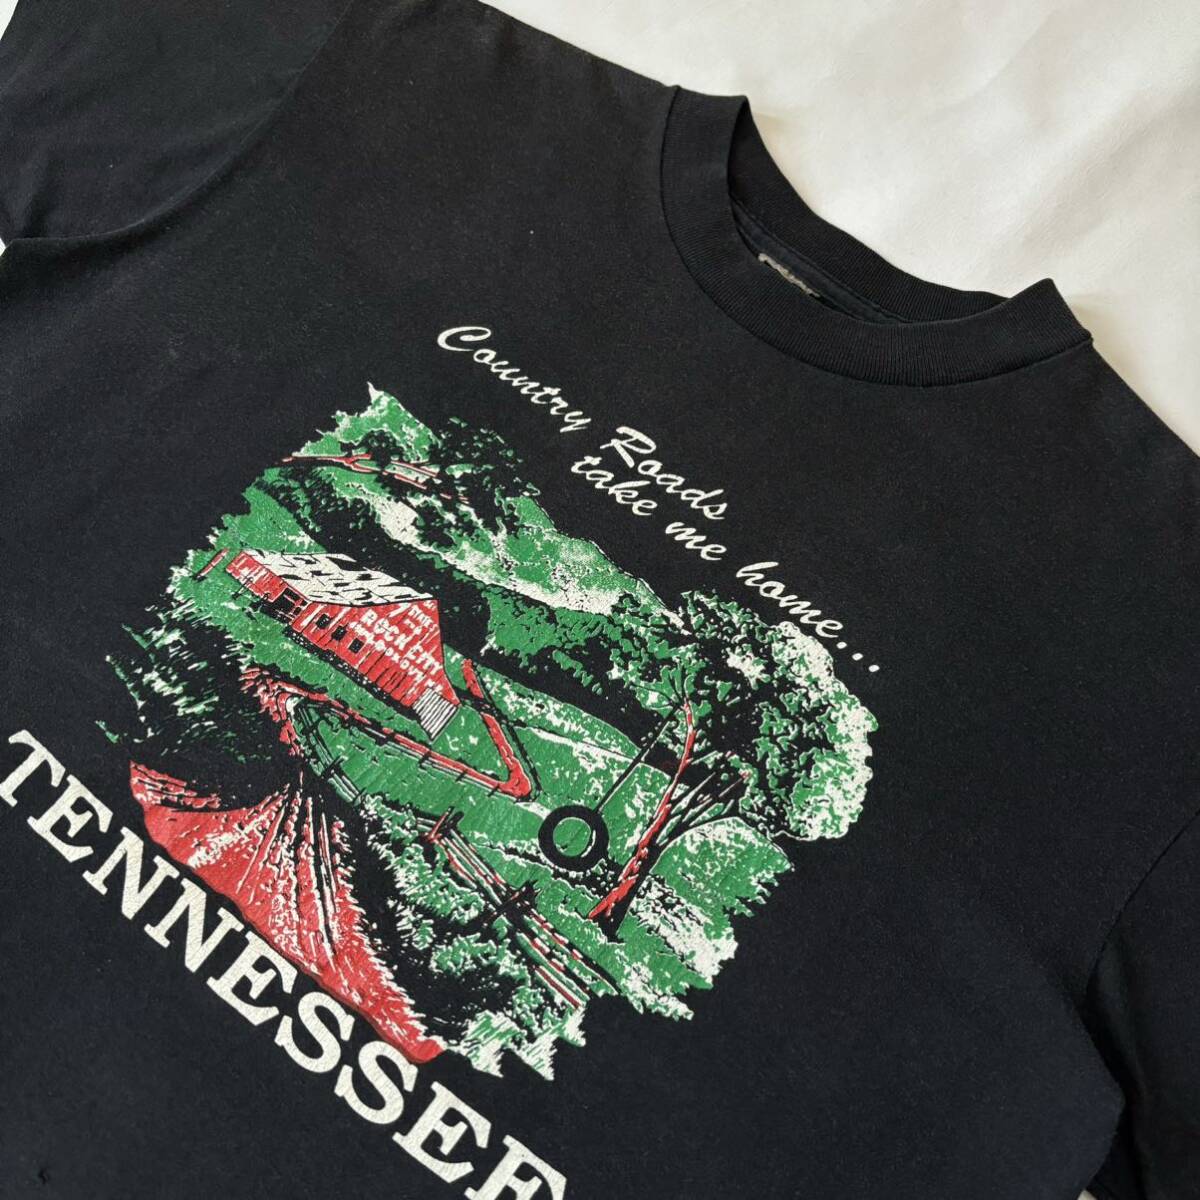 90s Unkown Tennessee Country Roads take me home Print Tee 90年代 テネシー カントリーロード プリント Tシャツ vintage ヴィンテージ_画像3